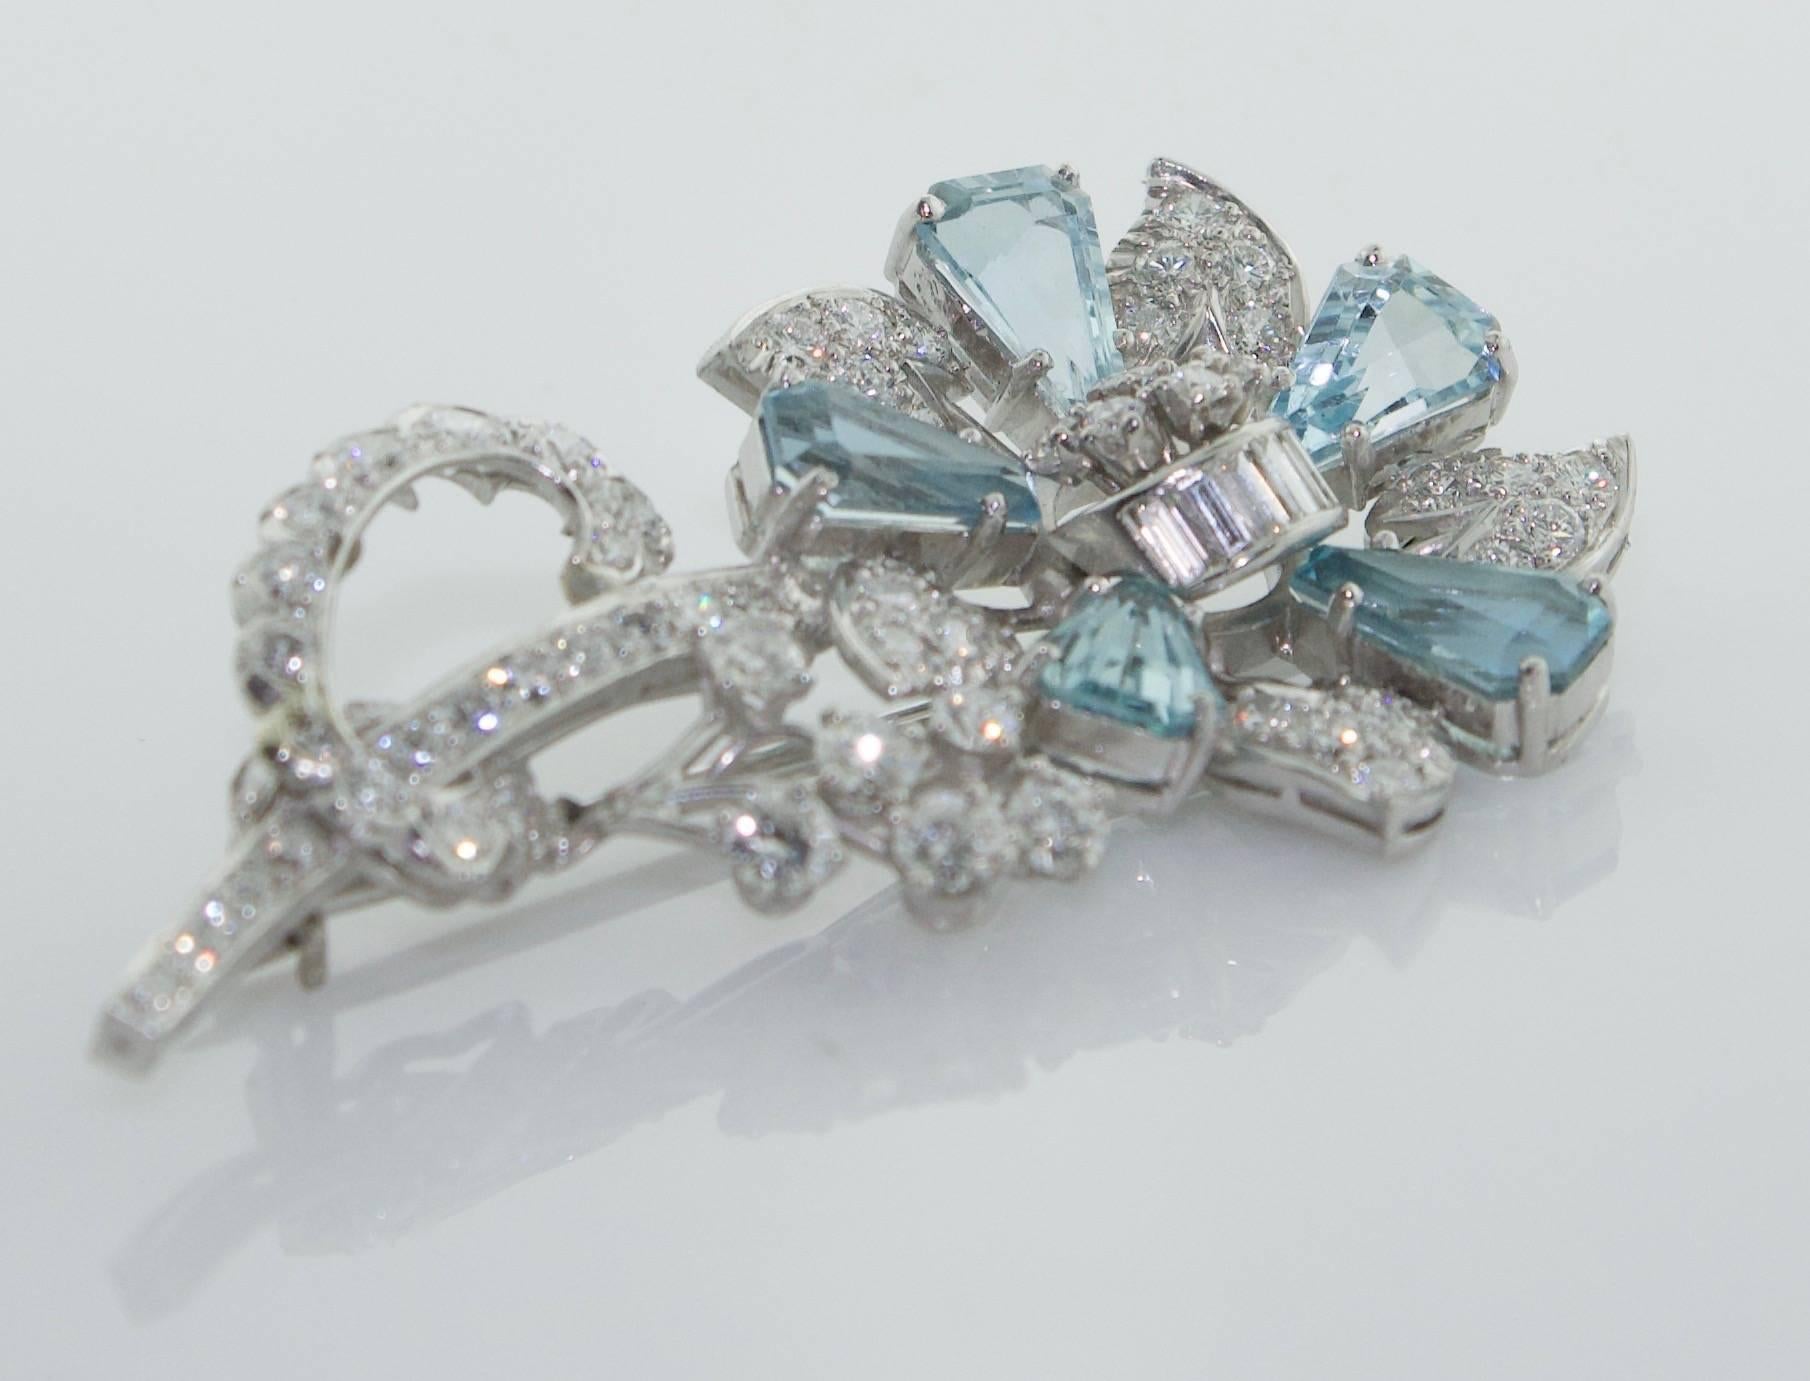 1940's Aquamarine and Diamond Flower Brooch in Platinum
Five Calf's Head Cut Aquamarines Weighing 4.50 carats (approximately)
Sixty Eight Diamonds Weighing 2.40 carats (approximately)
Excellent Diamond Quality  GH VVS-VS1
The Workmanship is